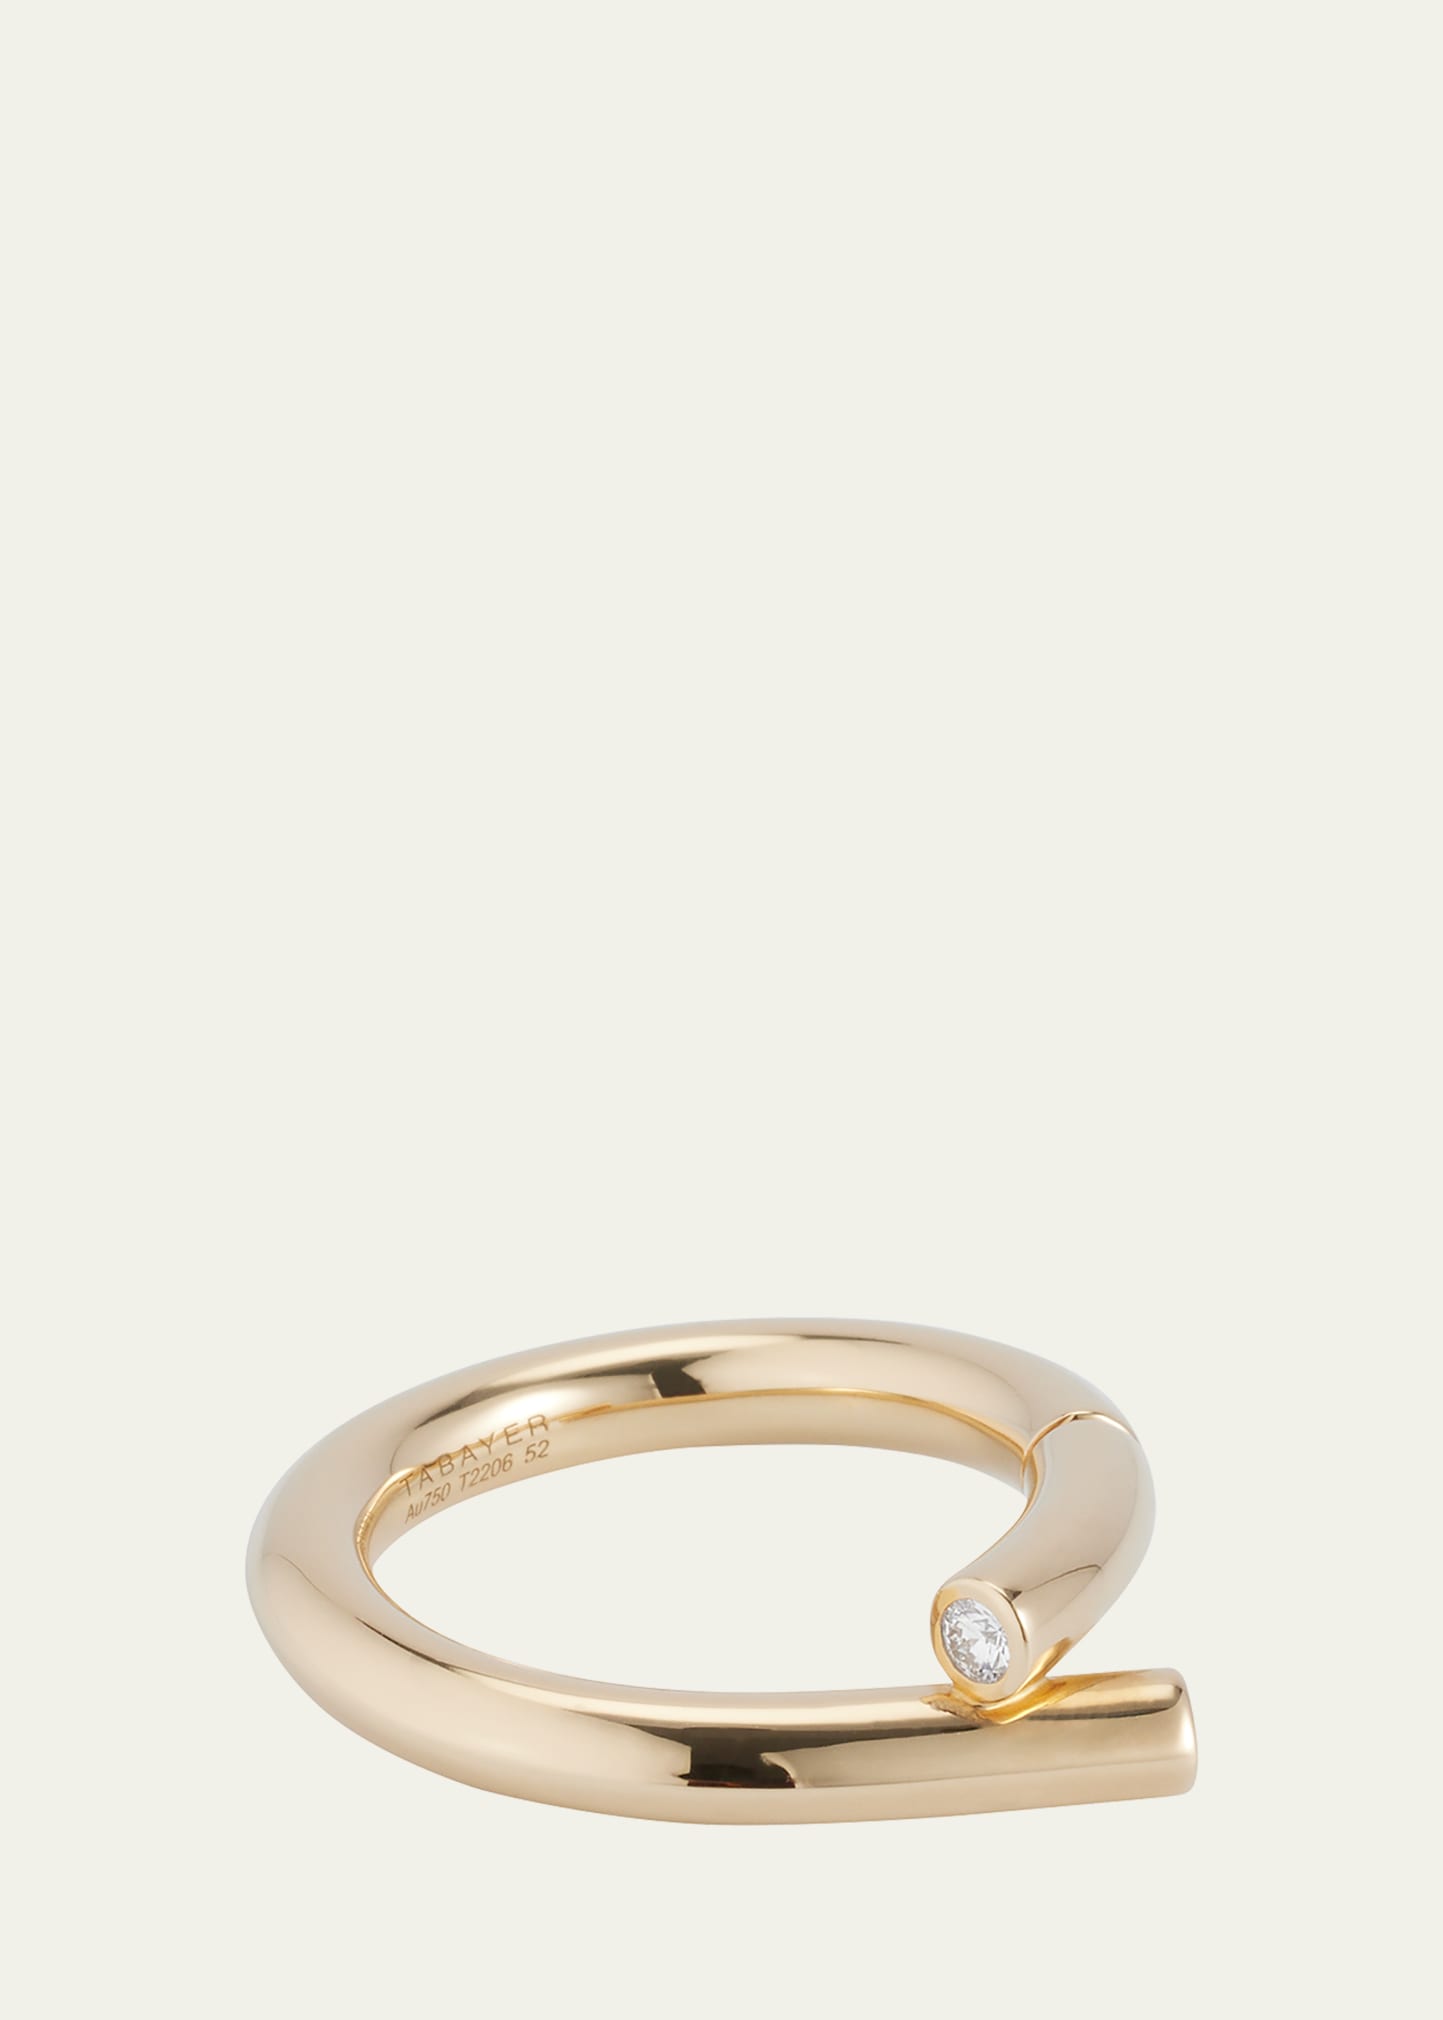 18k Fairmined Yellow Gold Ring with Diamond, Size 52